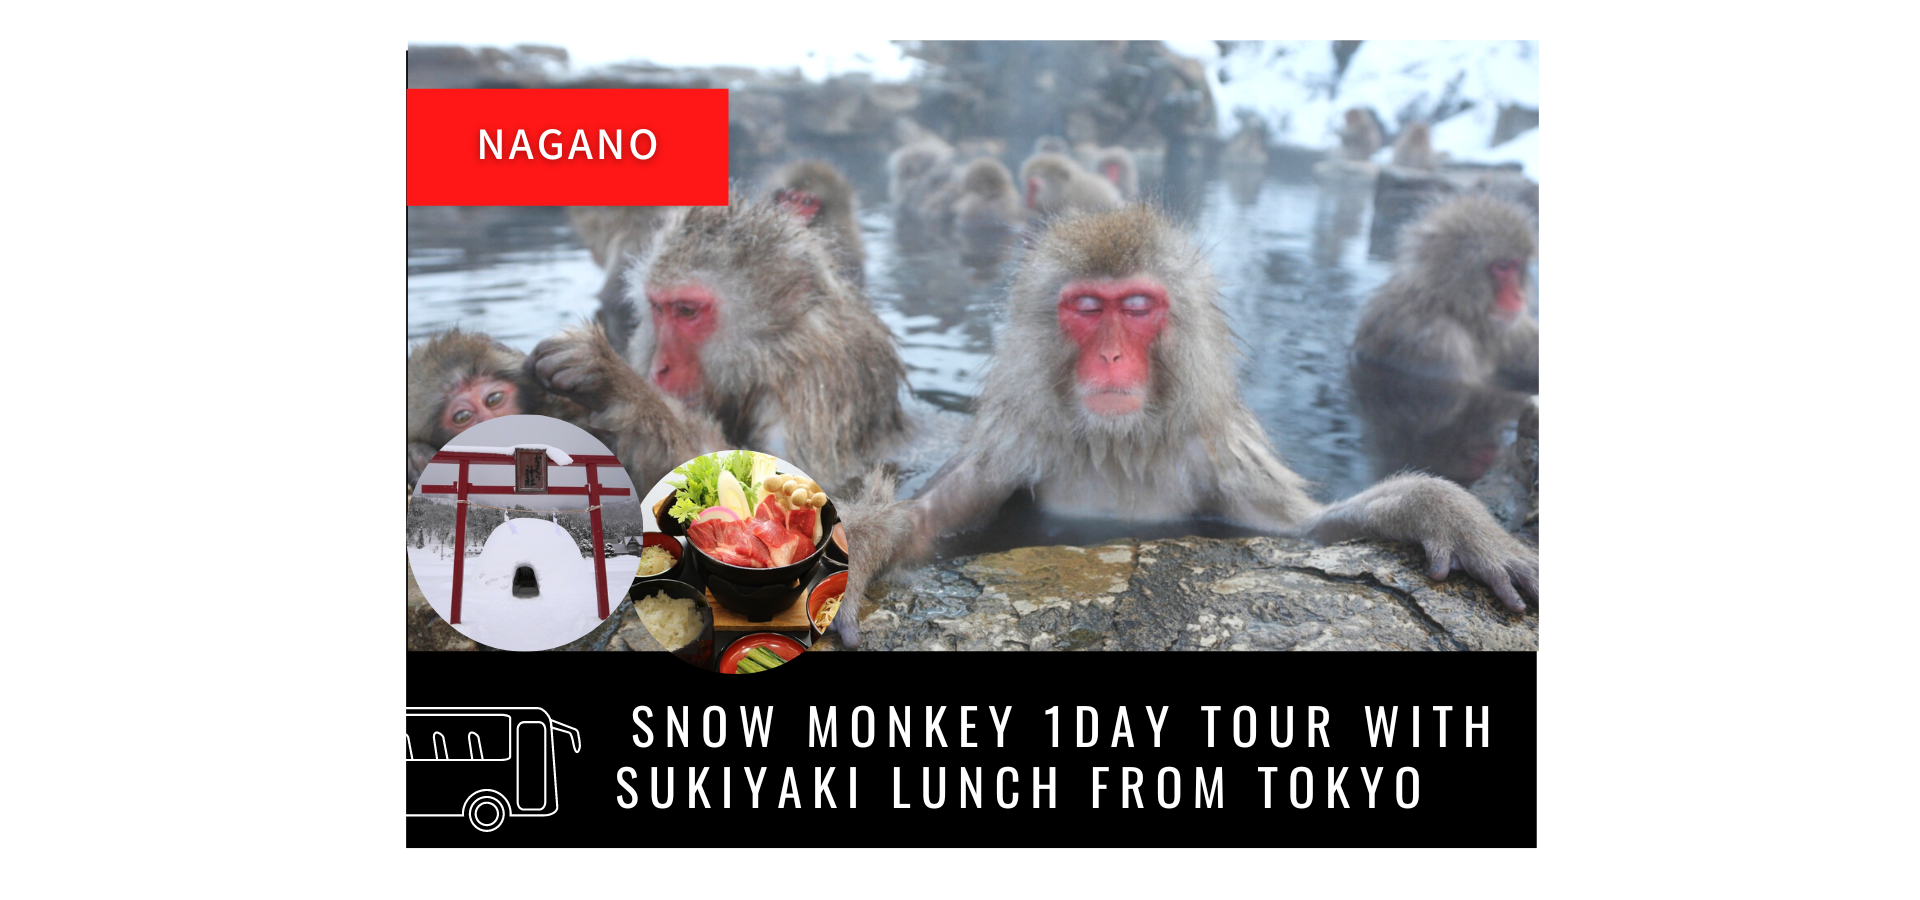 Snow Monkey 1 Day Tour with Beef Sukiyaki Lunch from Tokyo